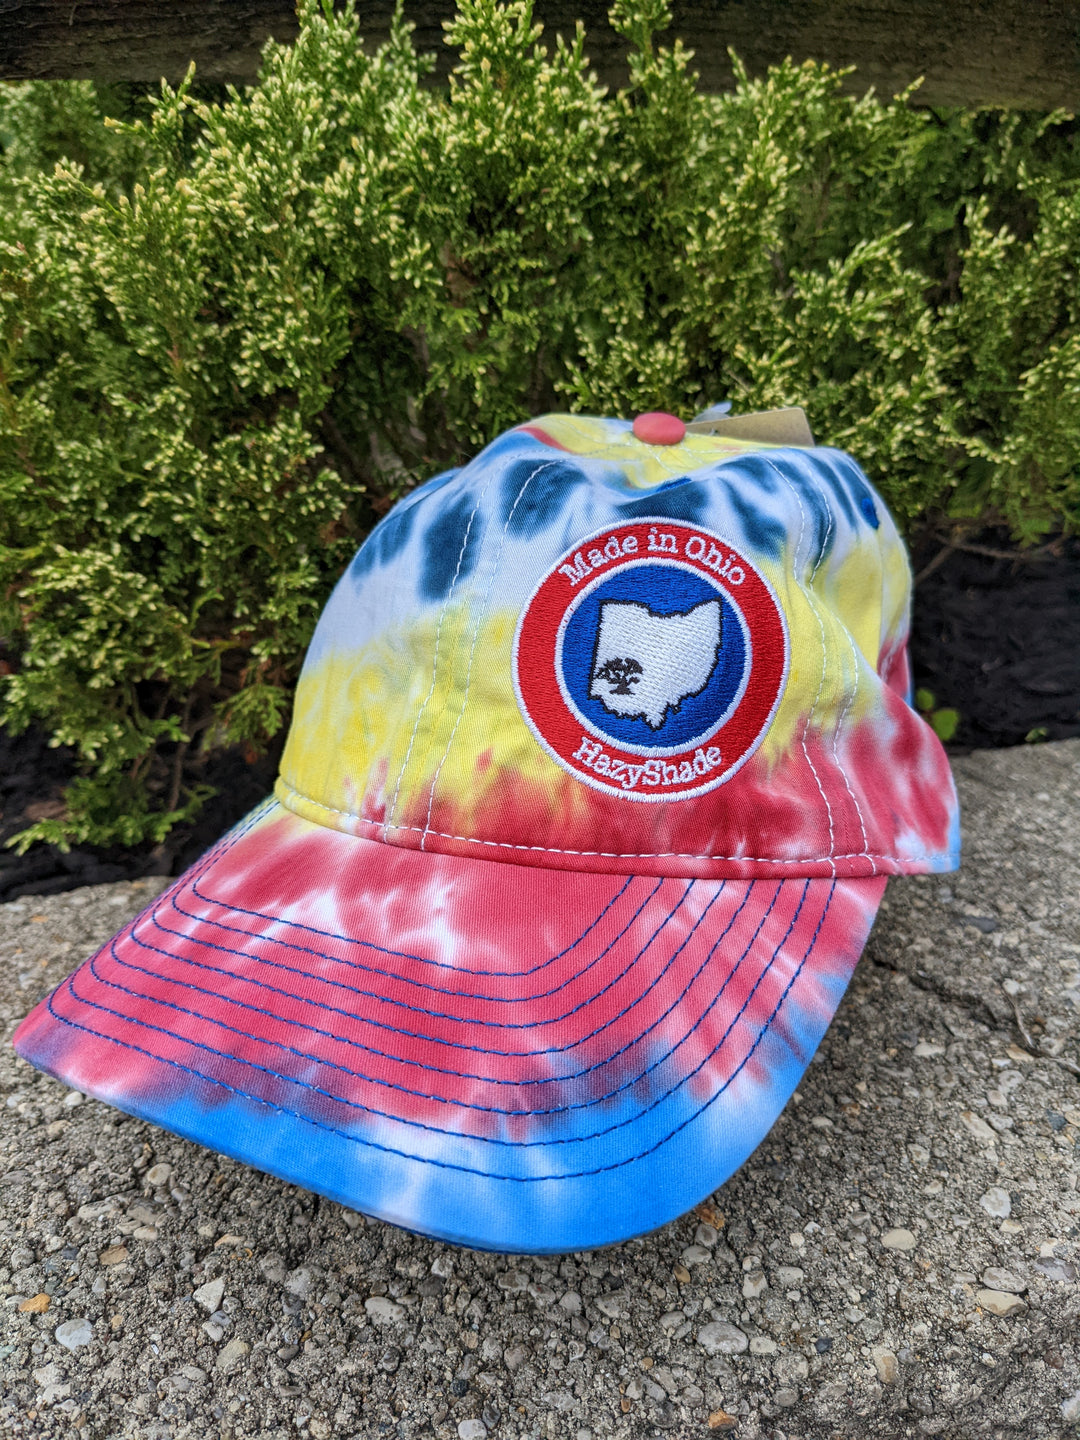 Hazy Shade "The Game" Tie Dyed Strap Back Hat